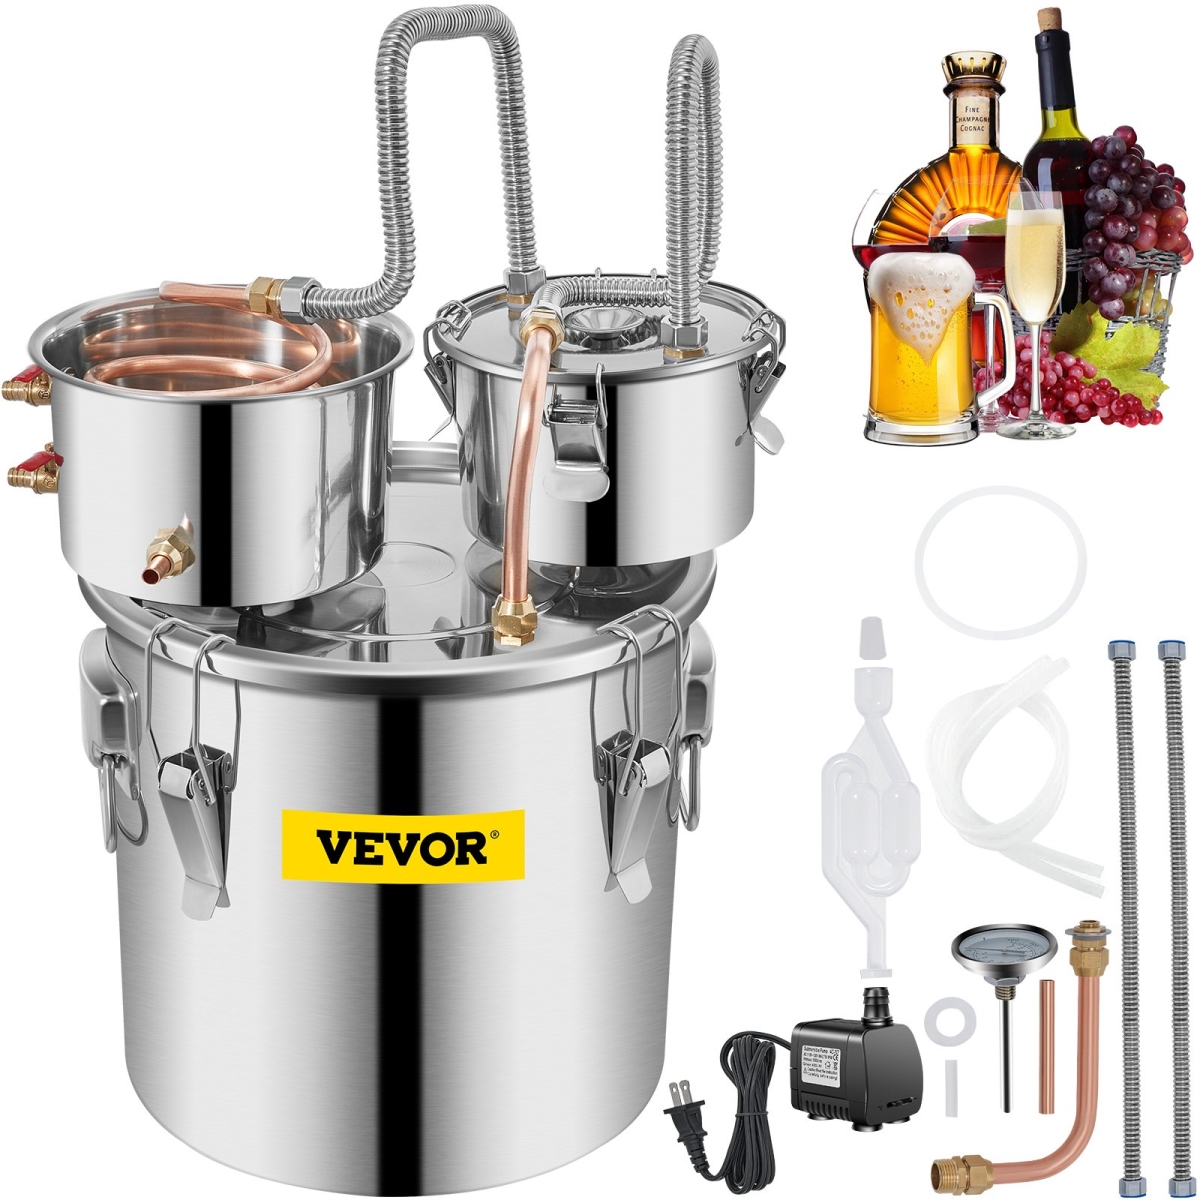 Picture of Vevor ZLSJ8GALSLNTZLQDBV1 8 gal Home Use Moonshine Still Brewing Stainless Steel Water Wine Alcohol Double Keg